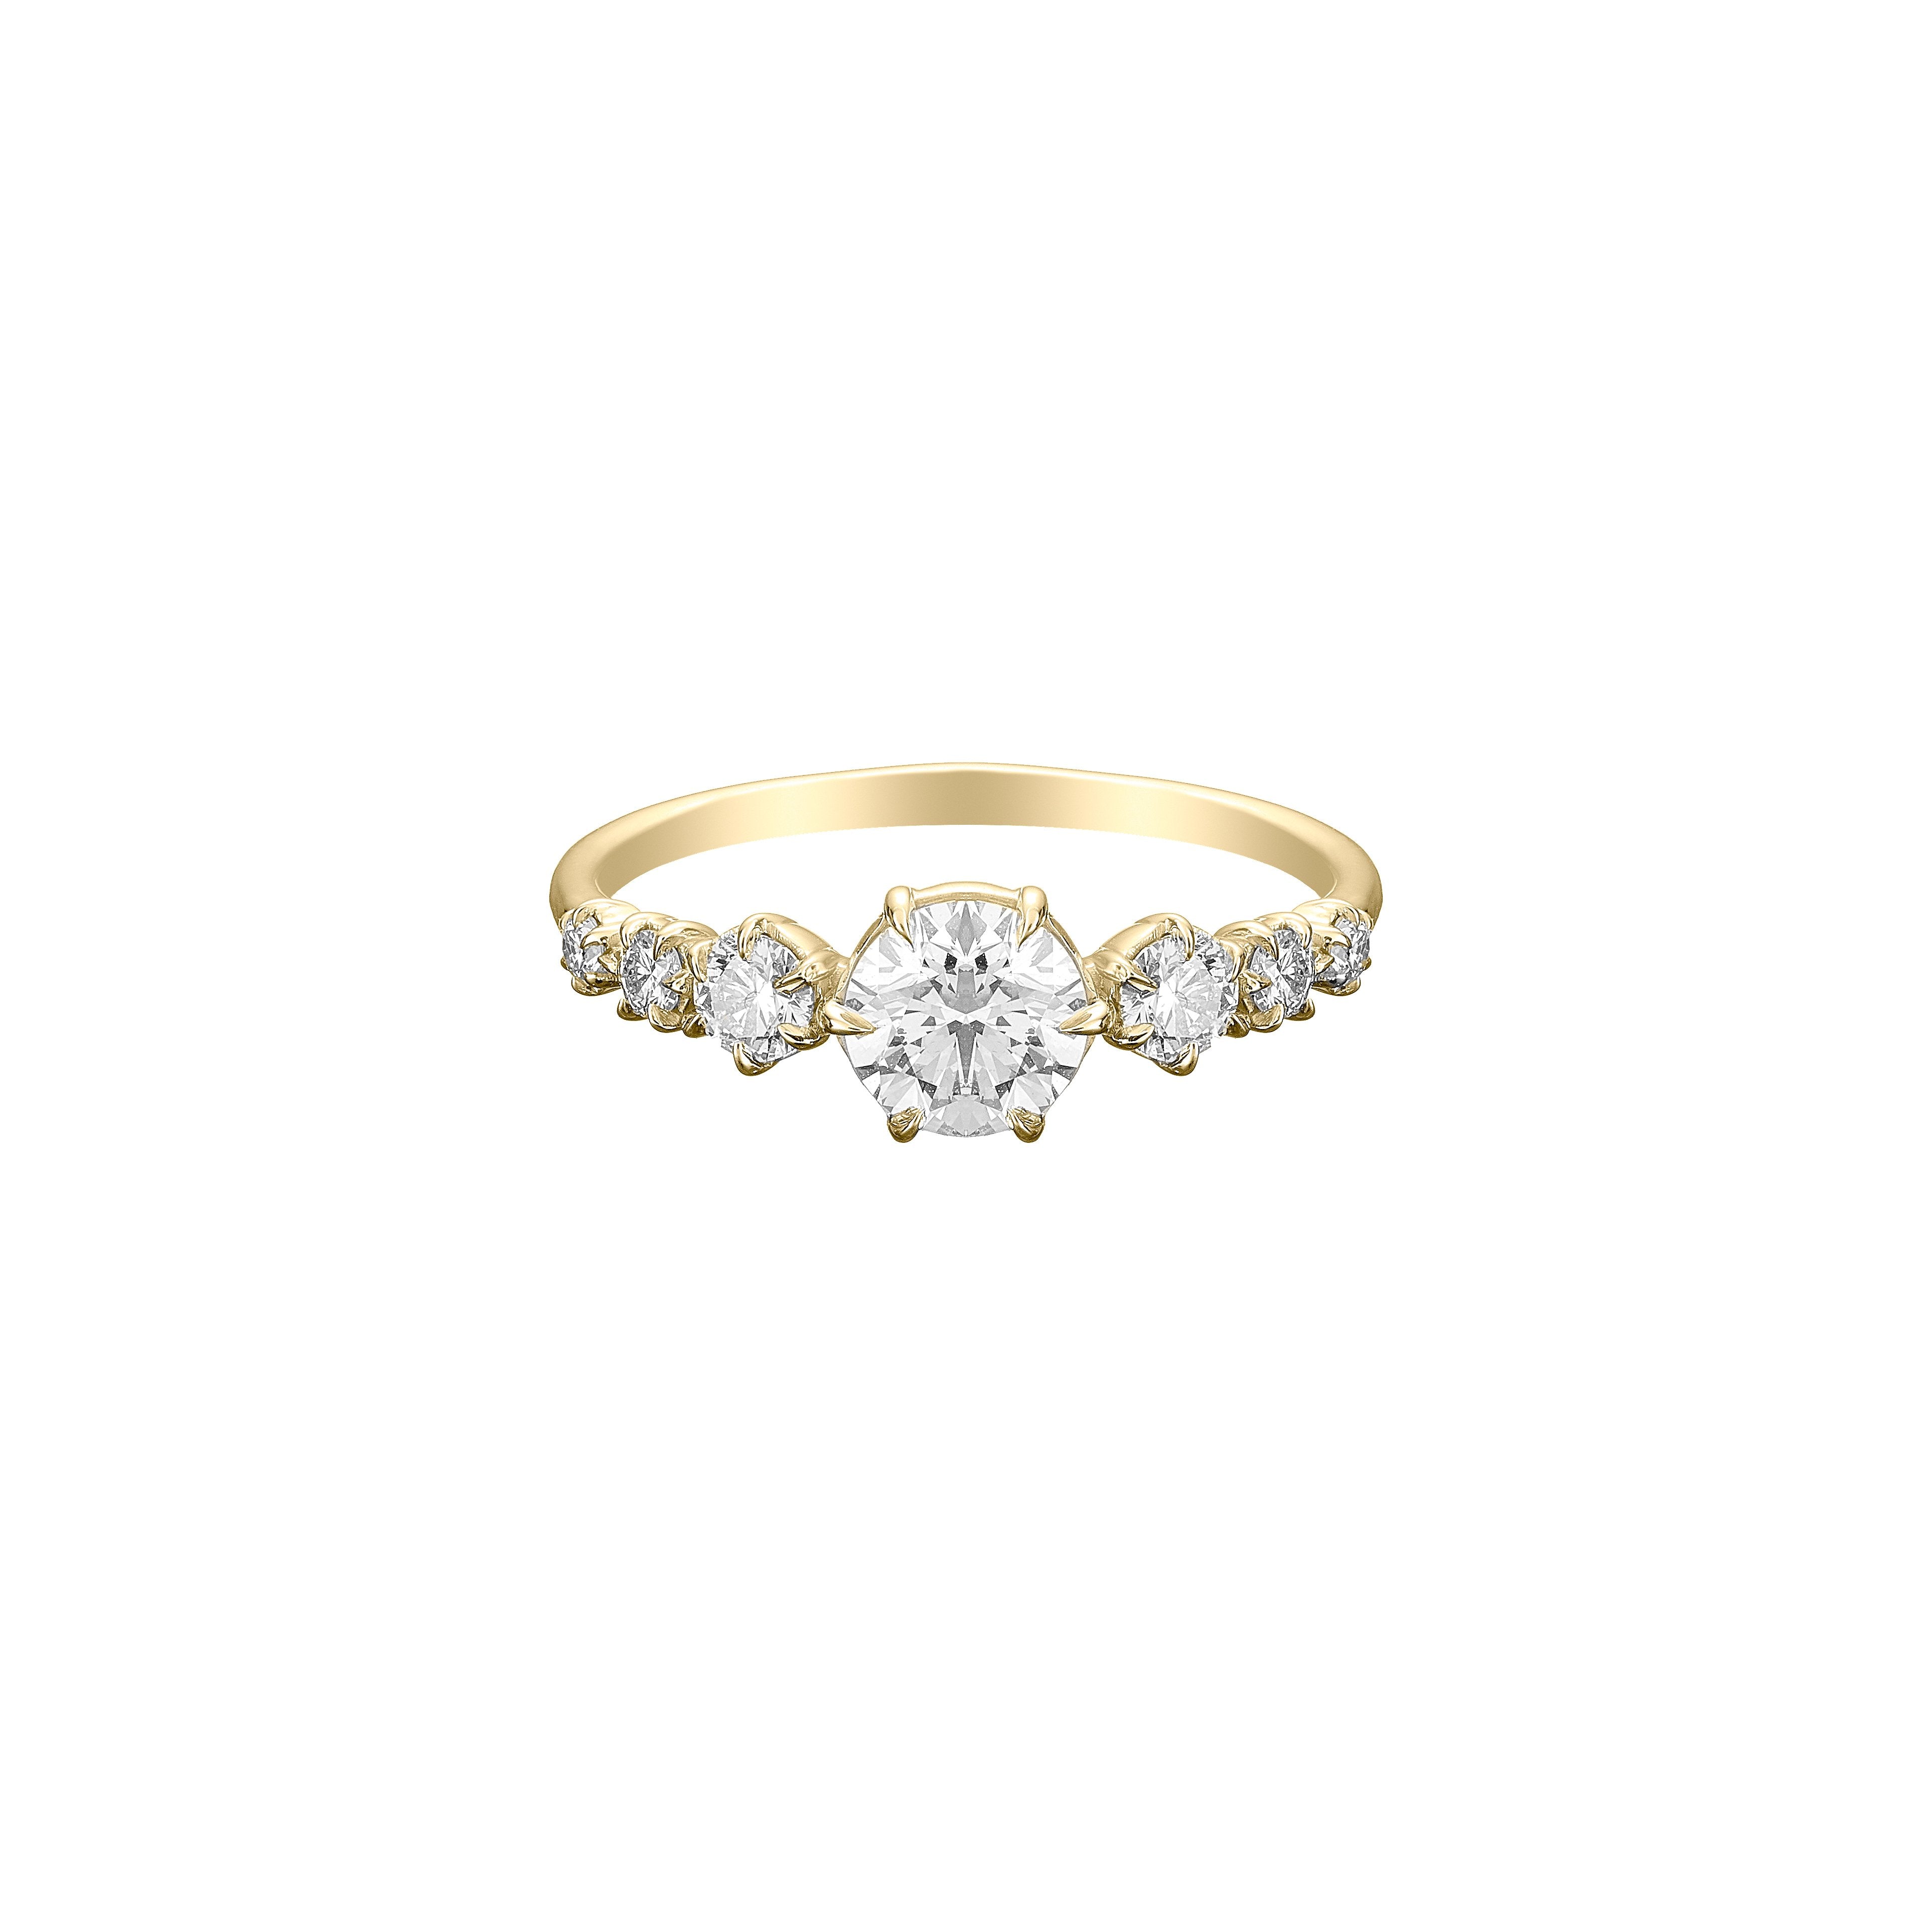 Catherine Ring in 18K Yellow Gold